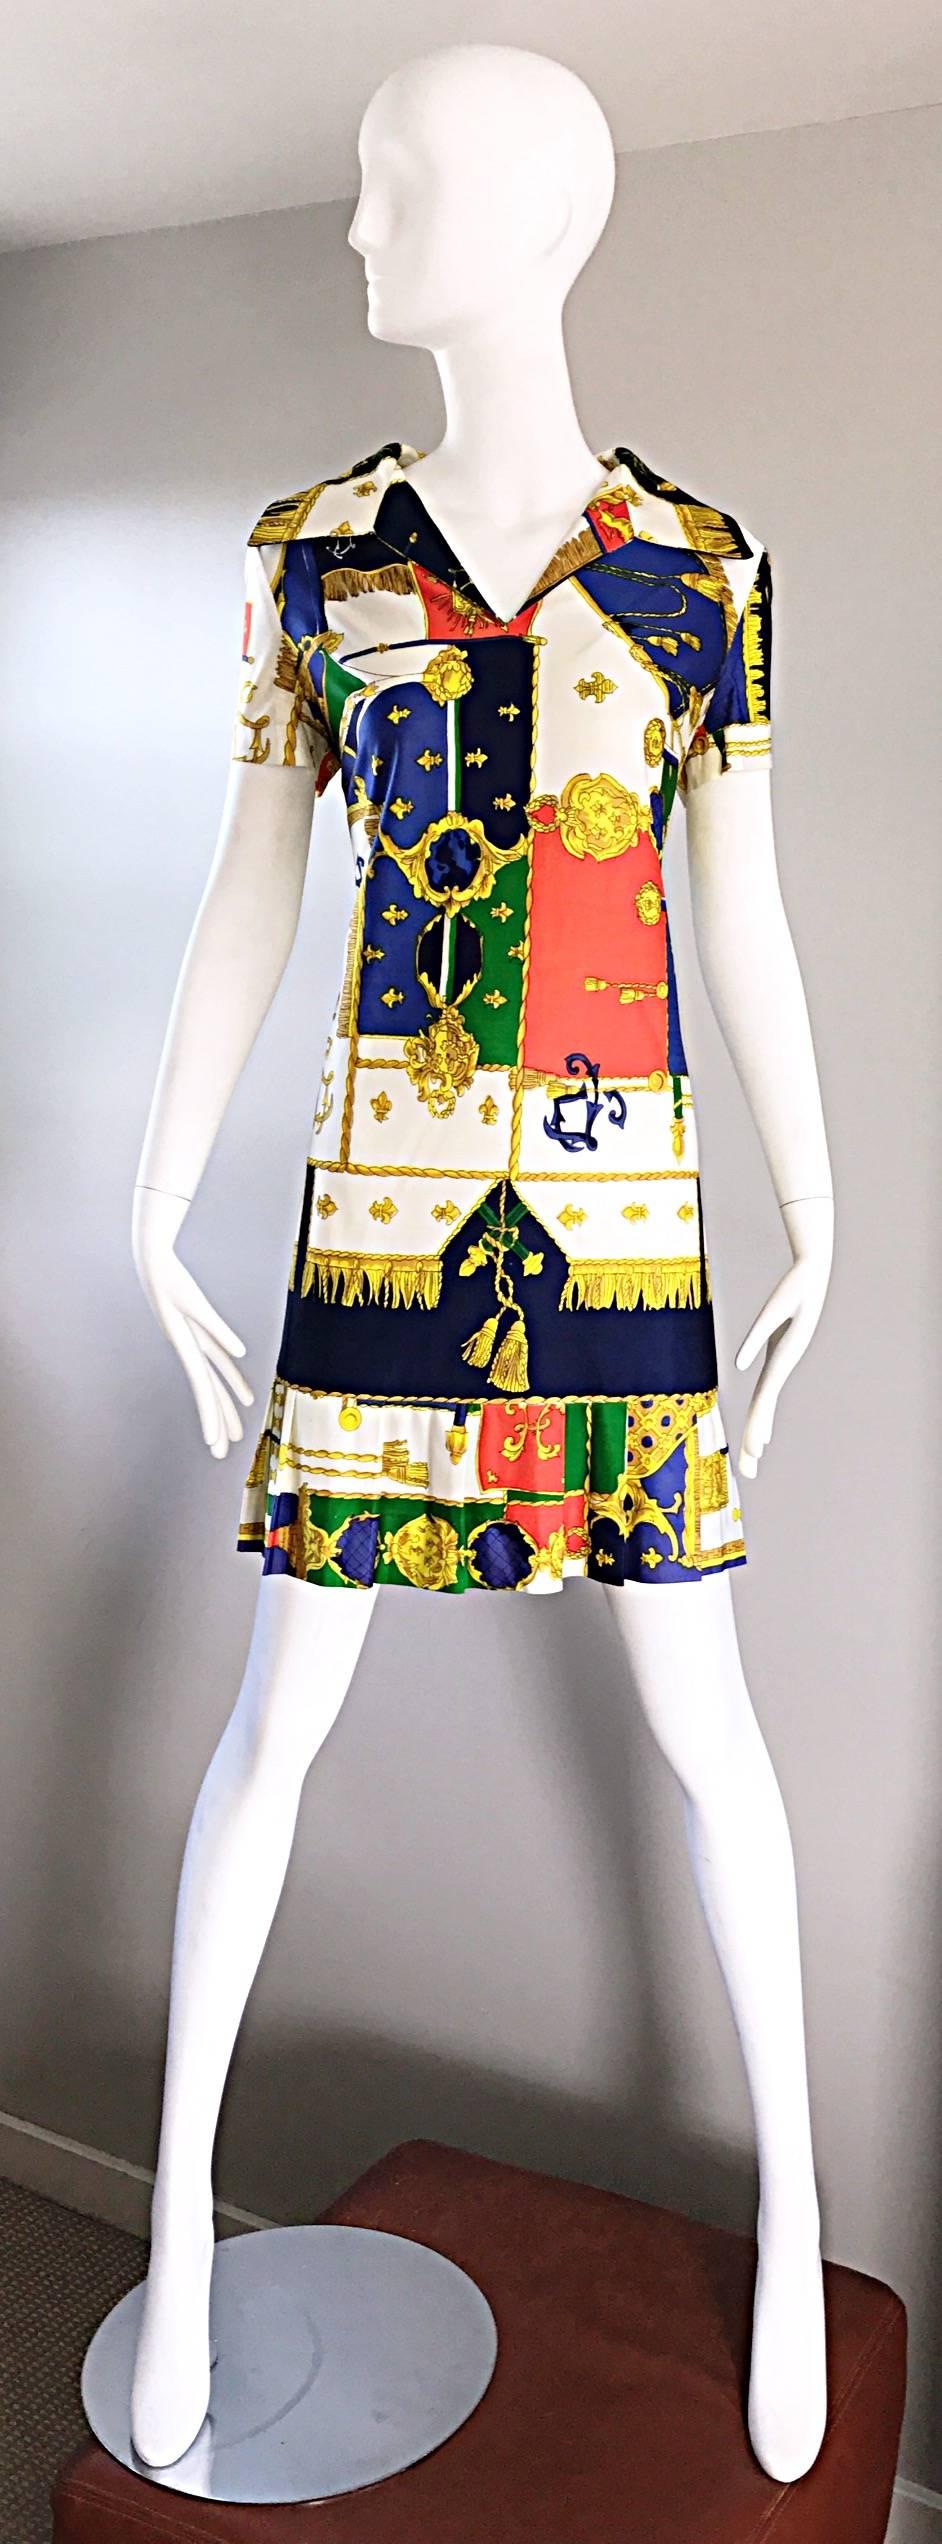 Fantastic vintage 1960s STACY AMES nautical novelty shift shirt dress! Features allover whimsical prints with crests, shields, and rope. Vibrant hues of orange, green, blue, yellow, gold and navy. Chic collar, with a flirty pleated hem. Hidden metal